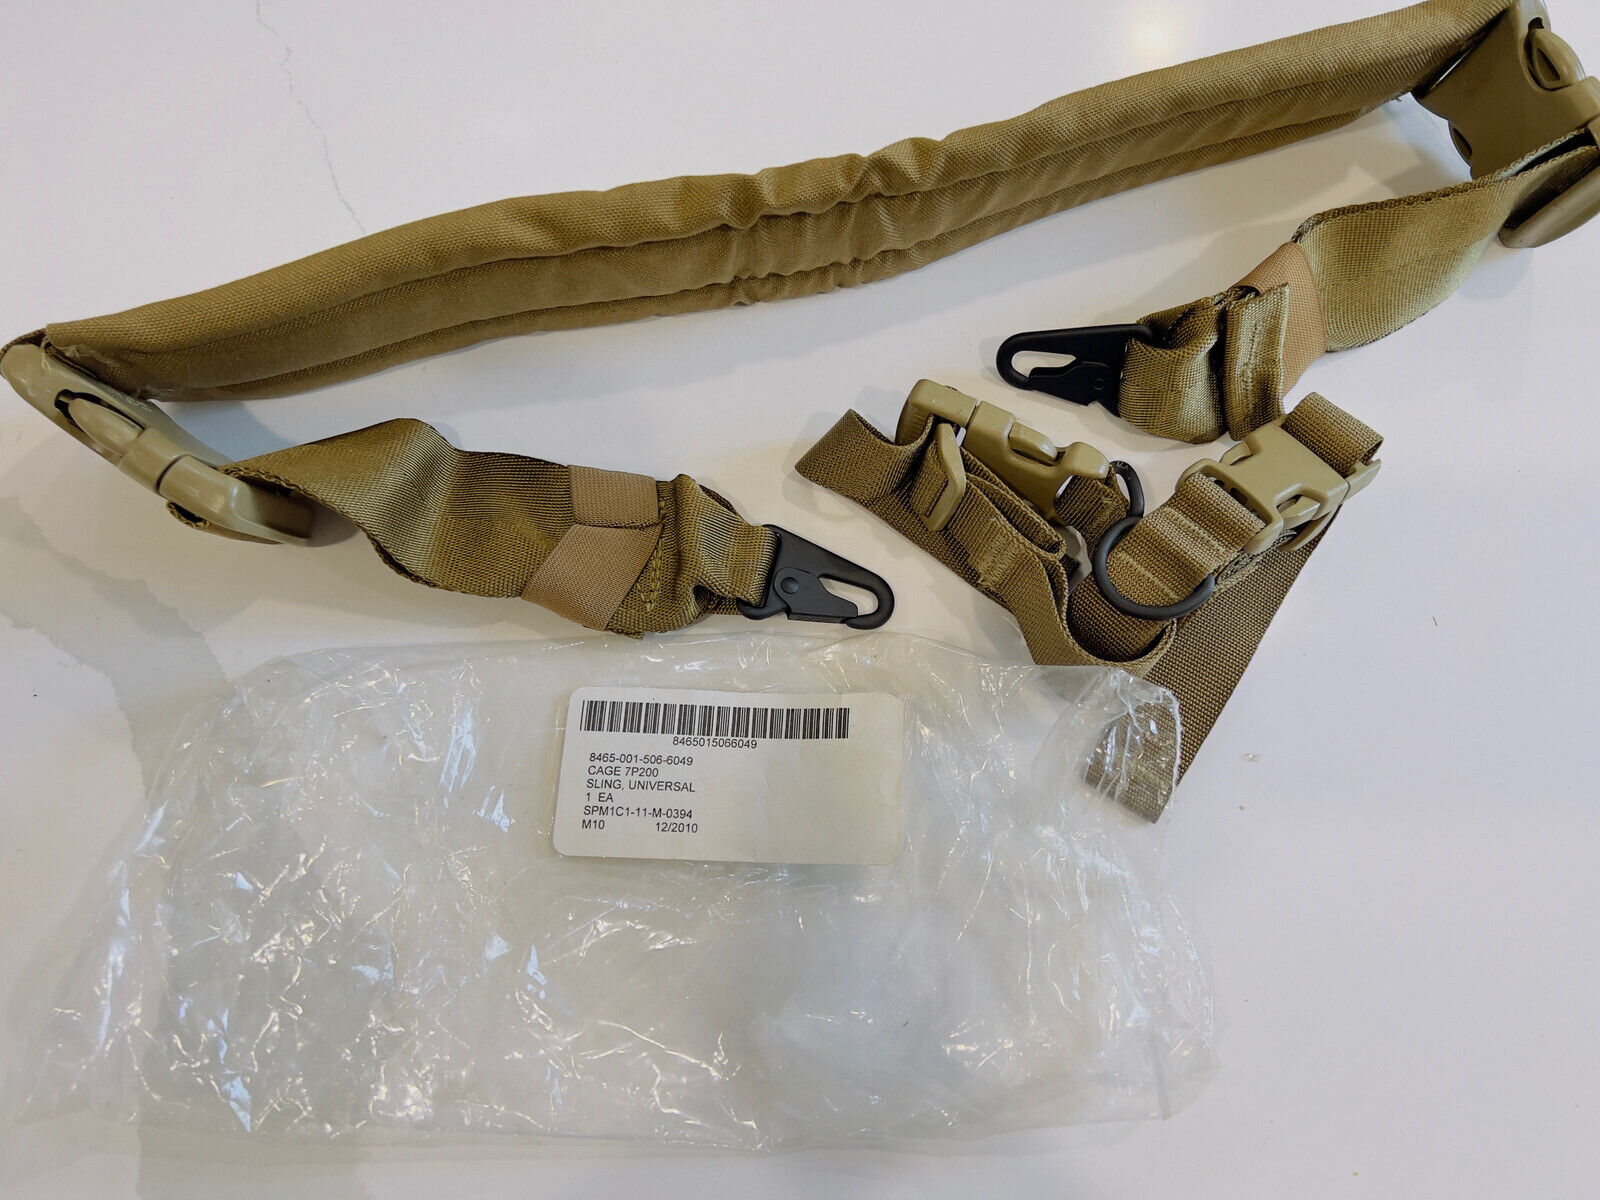 Military Universal Padded Sling  NSN 8465-001-506-6049 Shoulder Strap Coyote SAW